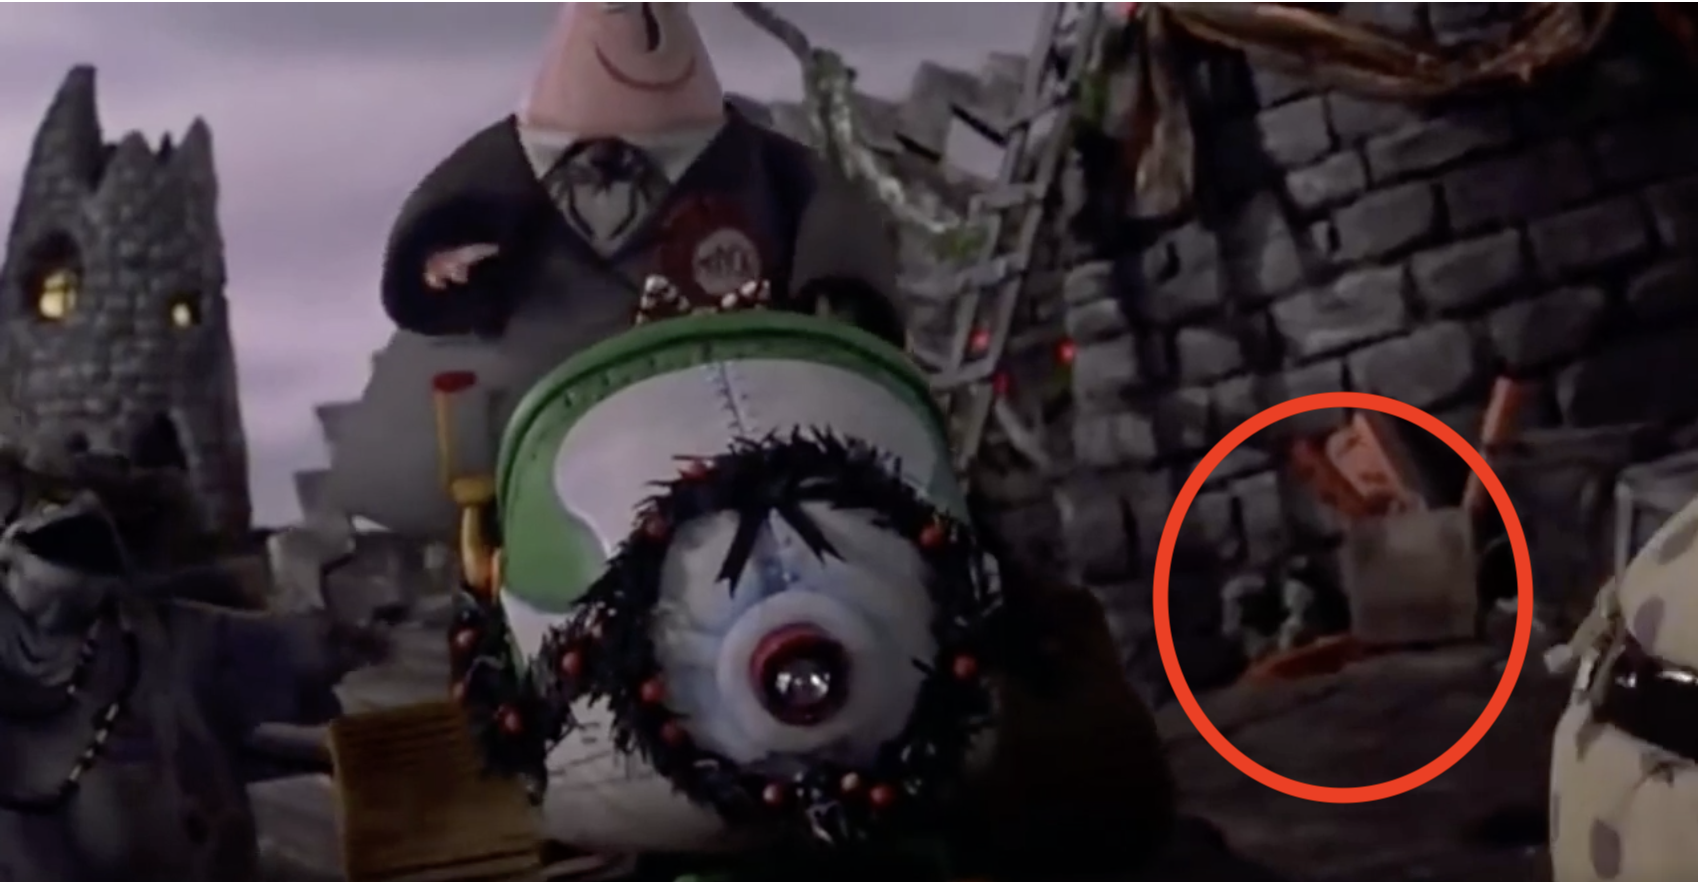 19 Itsy-Bitsy Details You Missed In These Iconic Halloween Movies